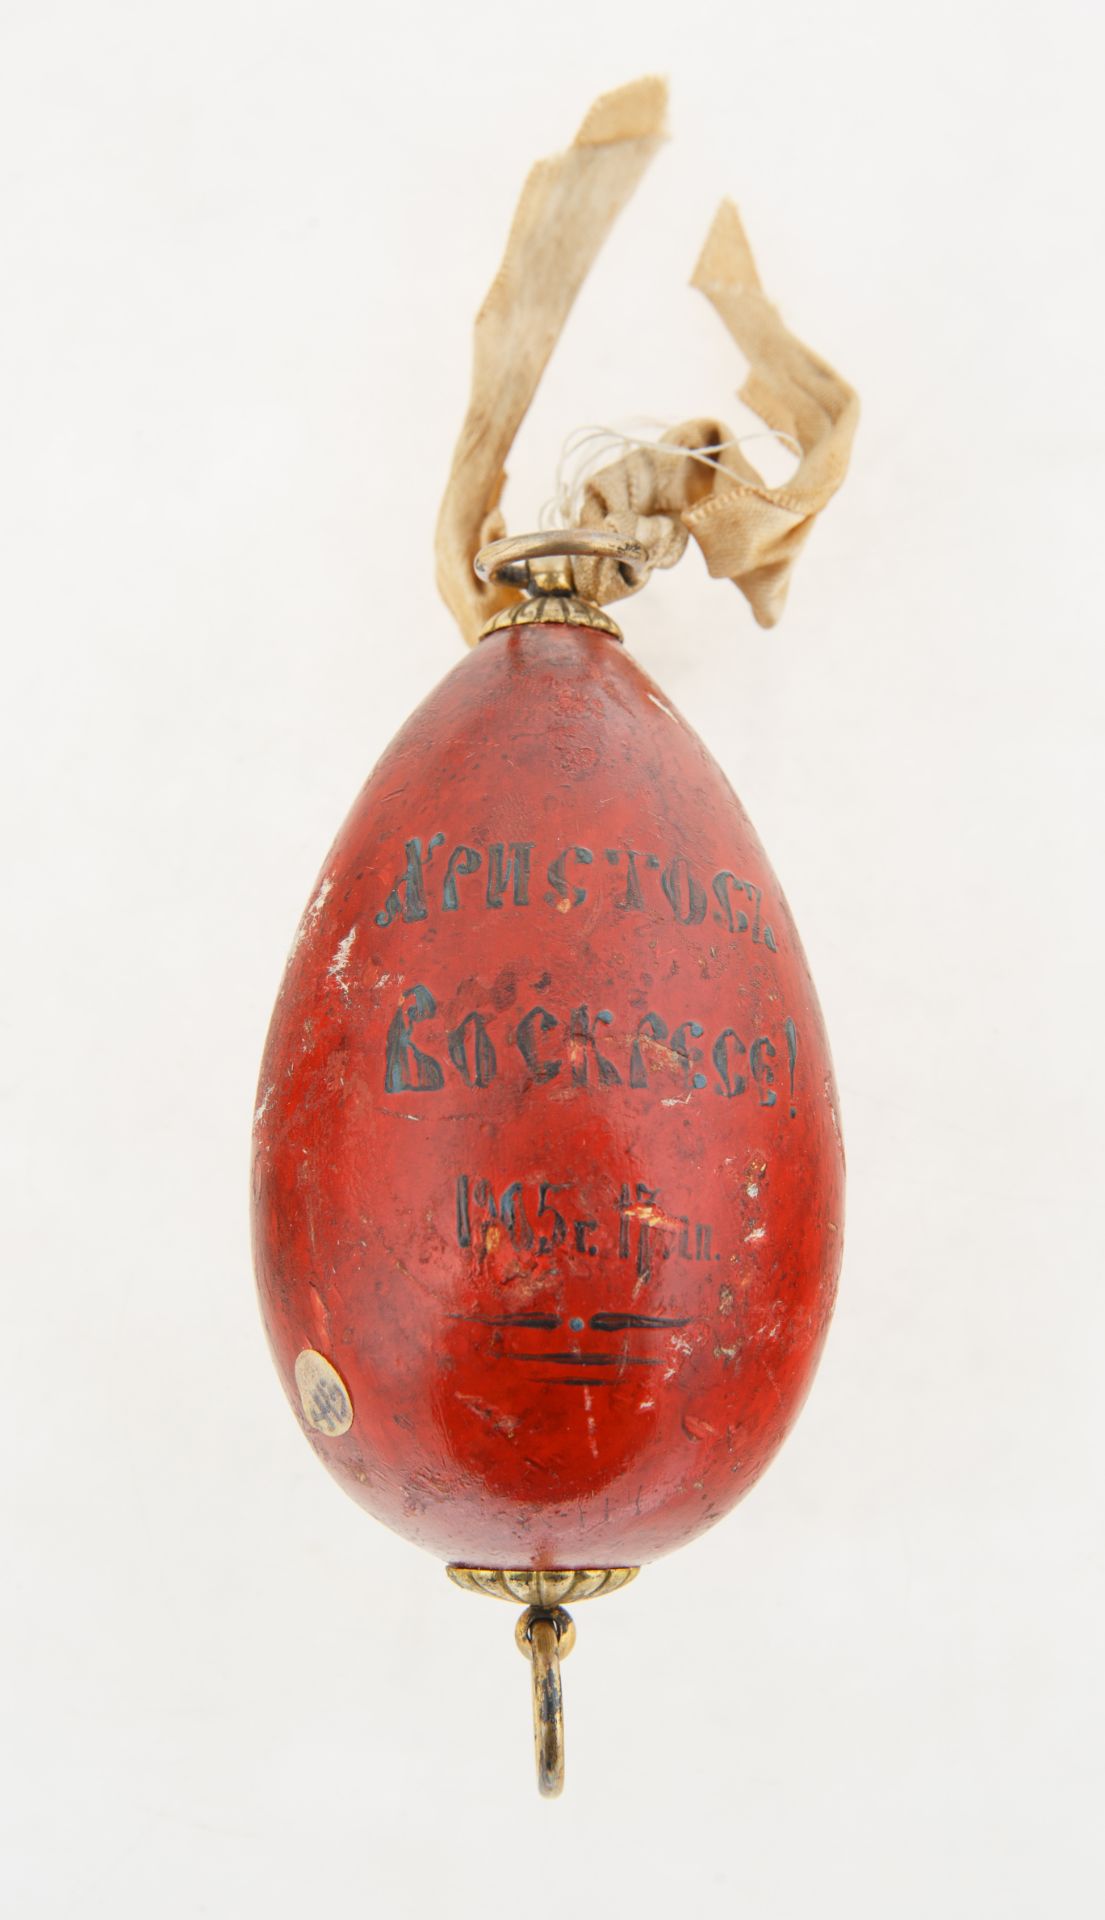 1905 RUSSIAN PAPIER-MACHE EASTER EGG OF ST. SERAPHIM - Image 2 of 4